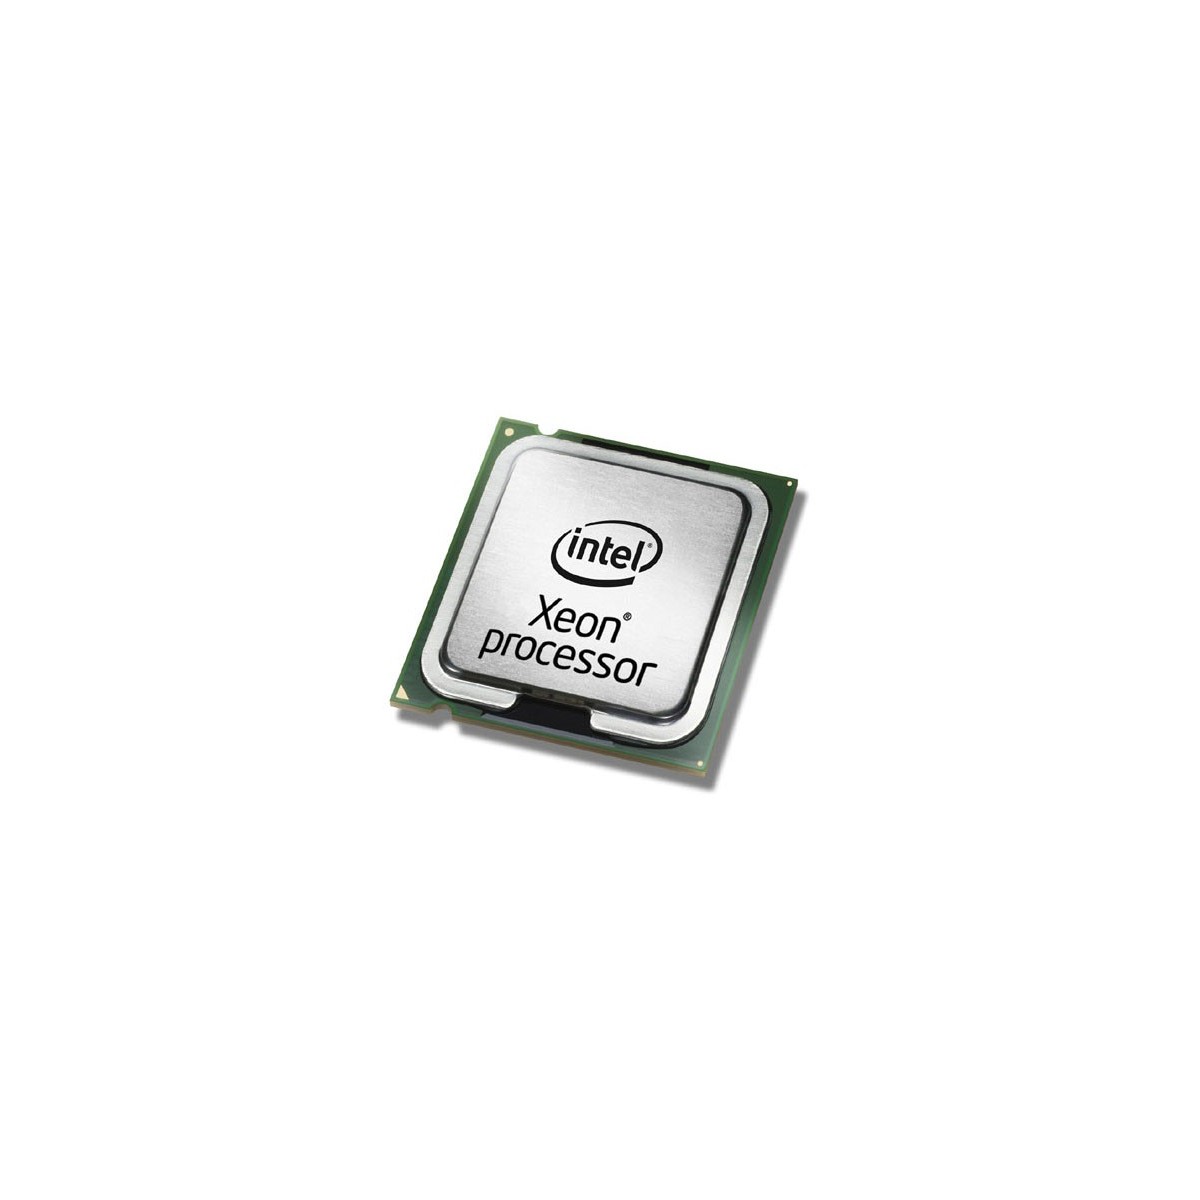 Intel Xeon E3-1225v3 3.2 GHz - Haswell